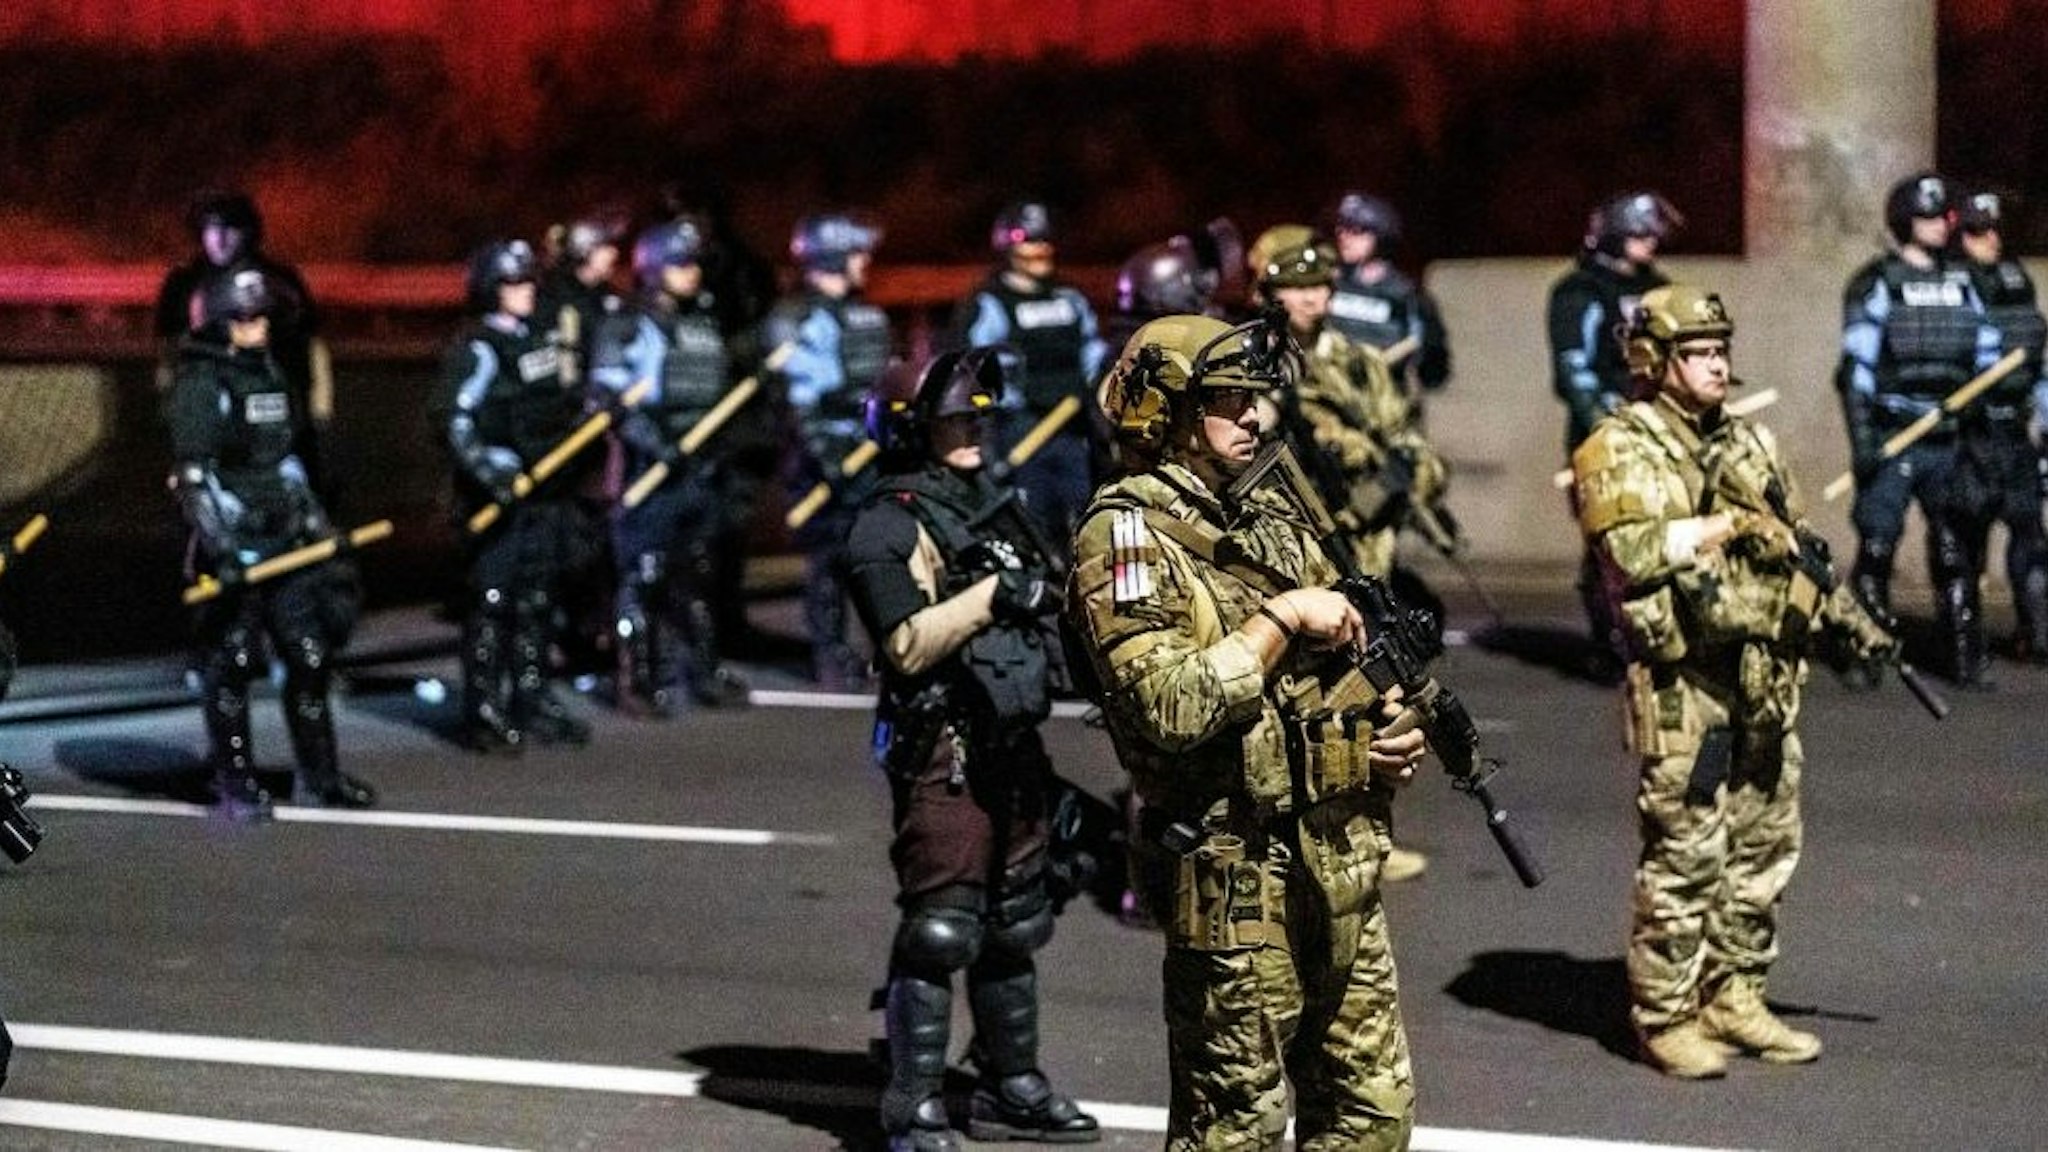 Minneapolis Police Department officers form a line to control demonstrators after declaring an unlawful assembly in Minneapolis, Minnesota on November 4, 2020. - Protestors and journalists were released later in the night. Democrats and Republicans girded November 4 for a legal showdown to decide the winner of the tight presidential race between Republican Donald Trump and Democrat Joe Biden. (Photo by Kerem Yucel / AFP) (Photo by